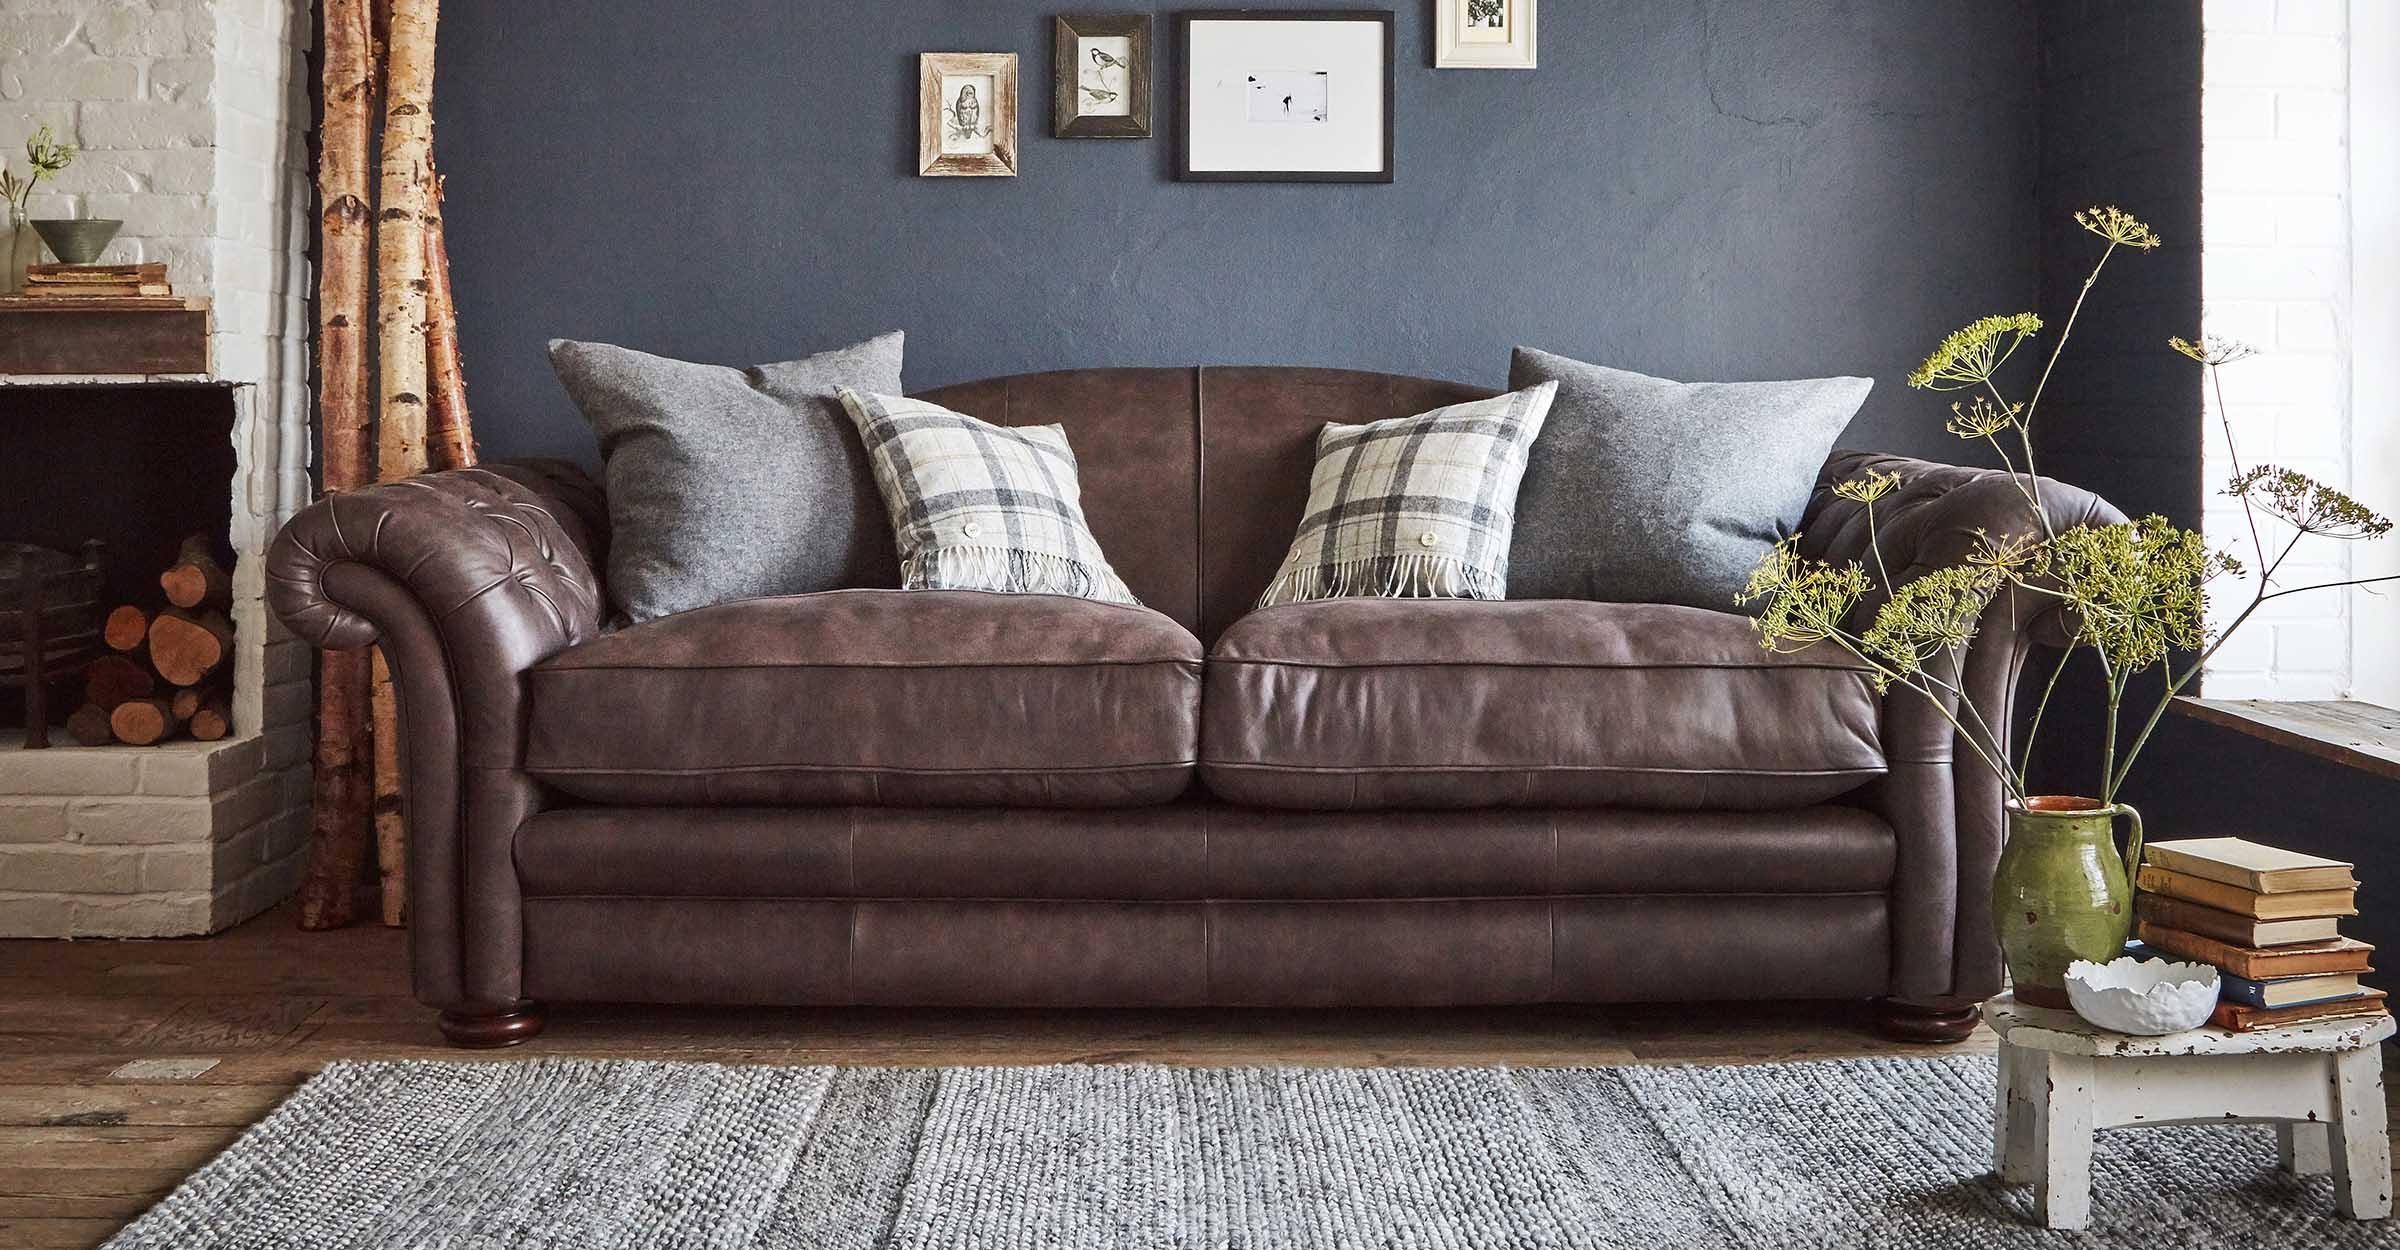 Brown Sofas Dfs, Does Dark Brown Sofa Go With Grey Carpet